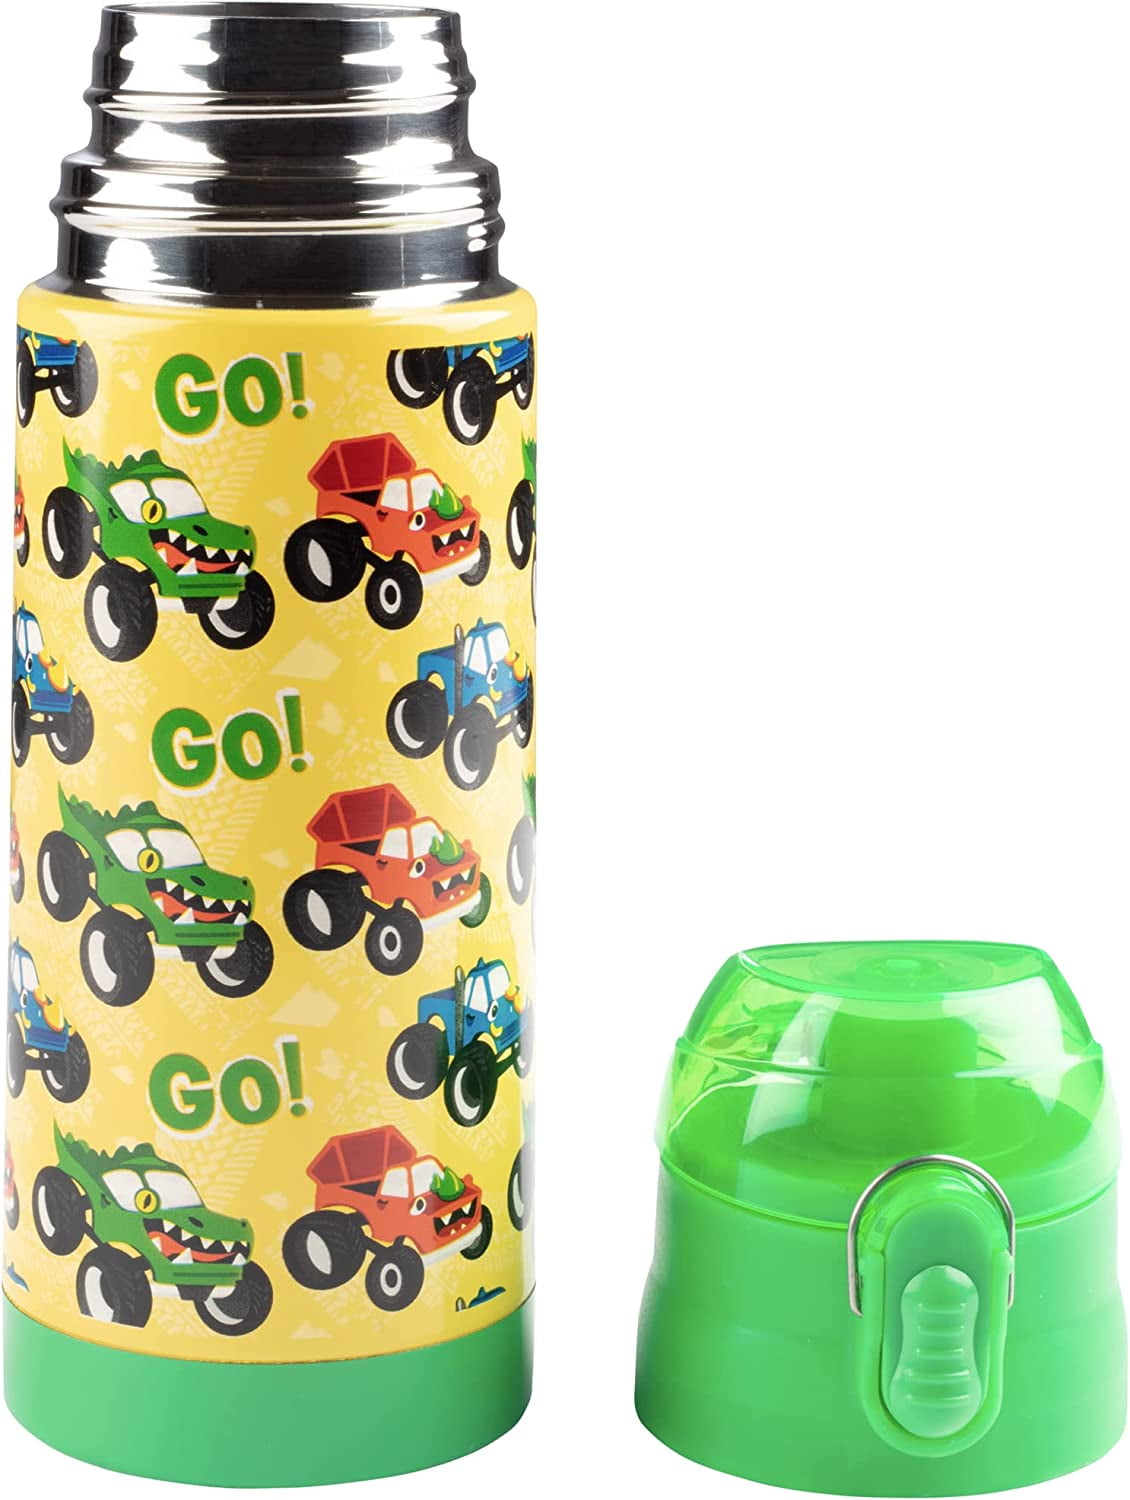 Orange Monster Trucks Car Kids Water Bottle with Silicone Straw Grunge Dots  Insulated Stainless Steel with Straw Lid BPA-Free Duck Mouth Handle